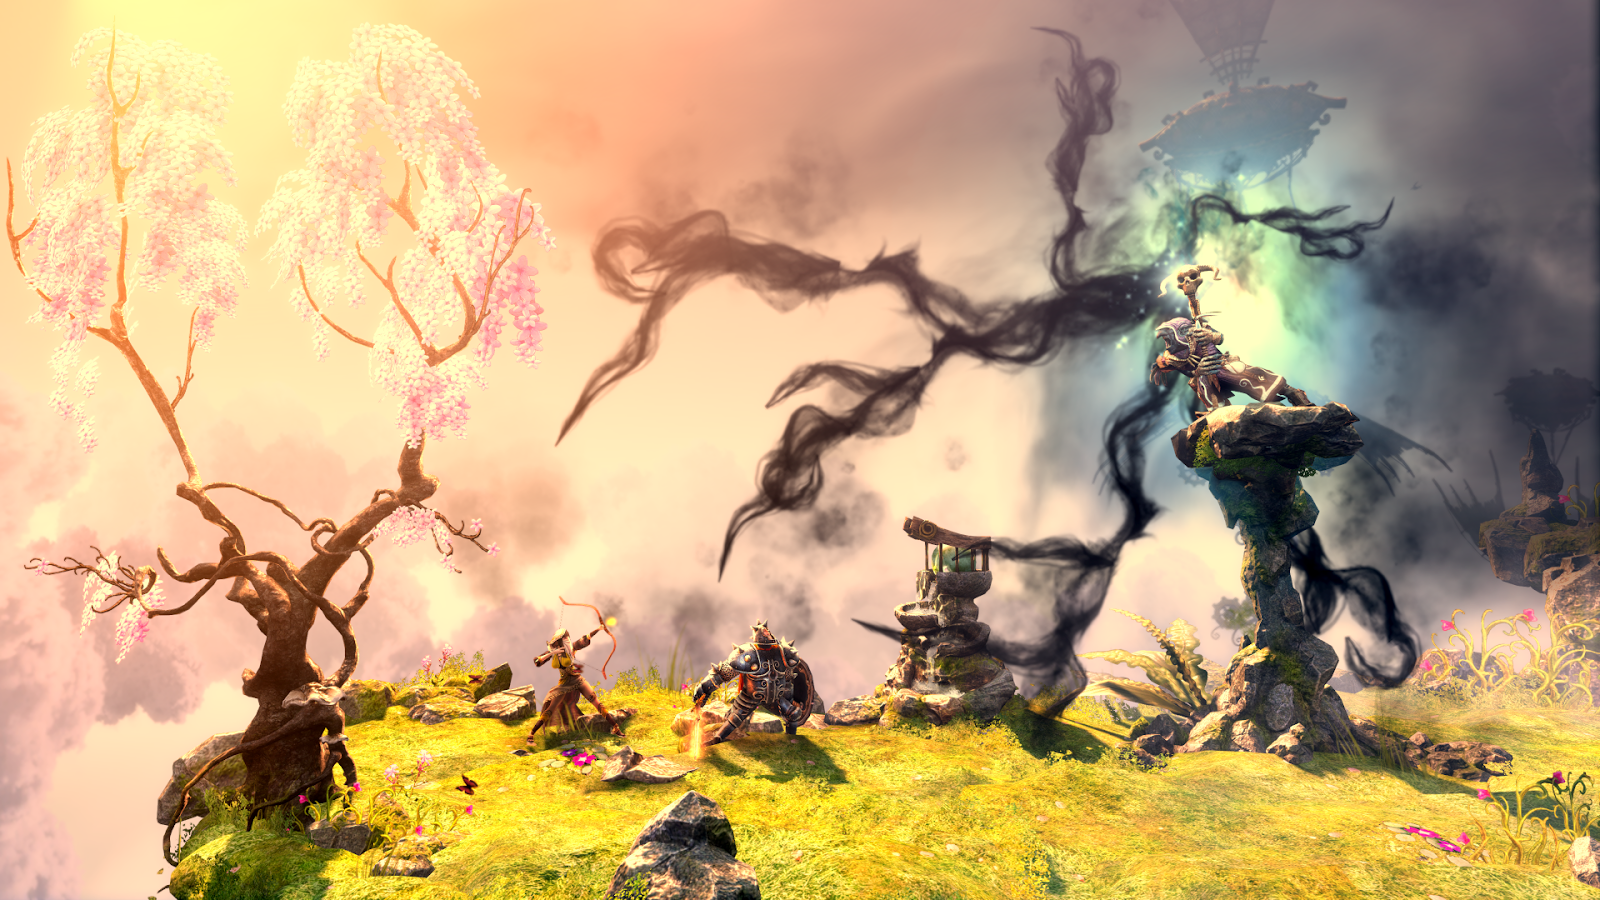 Amazing Trine 2 Pictures & Backgrounds